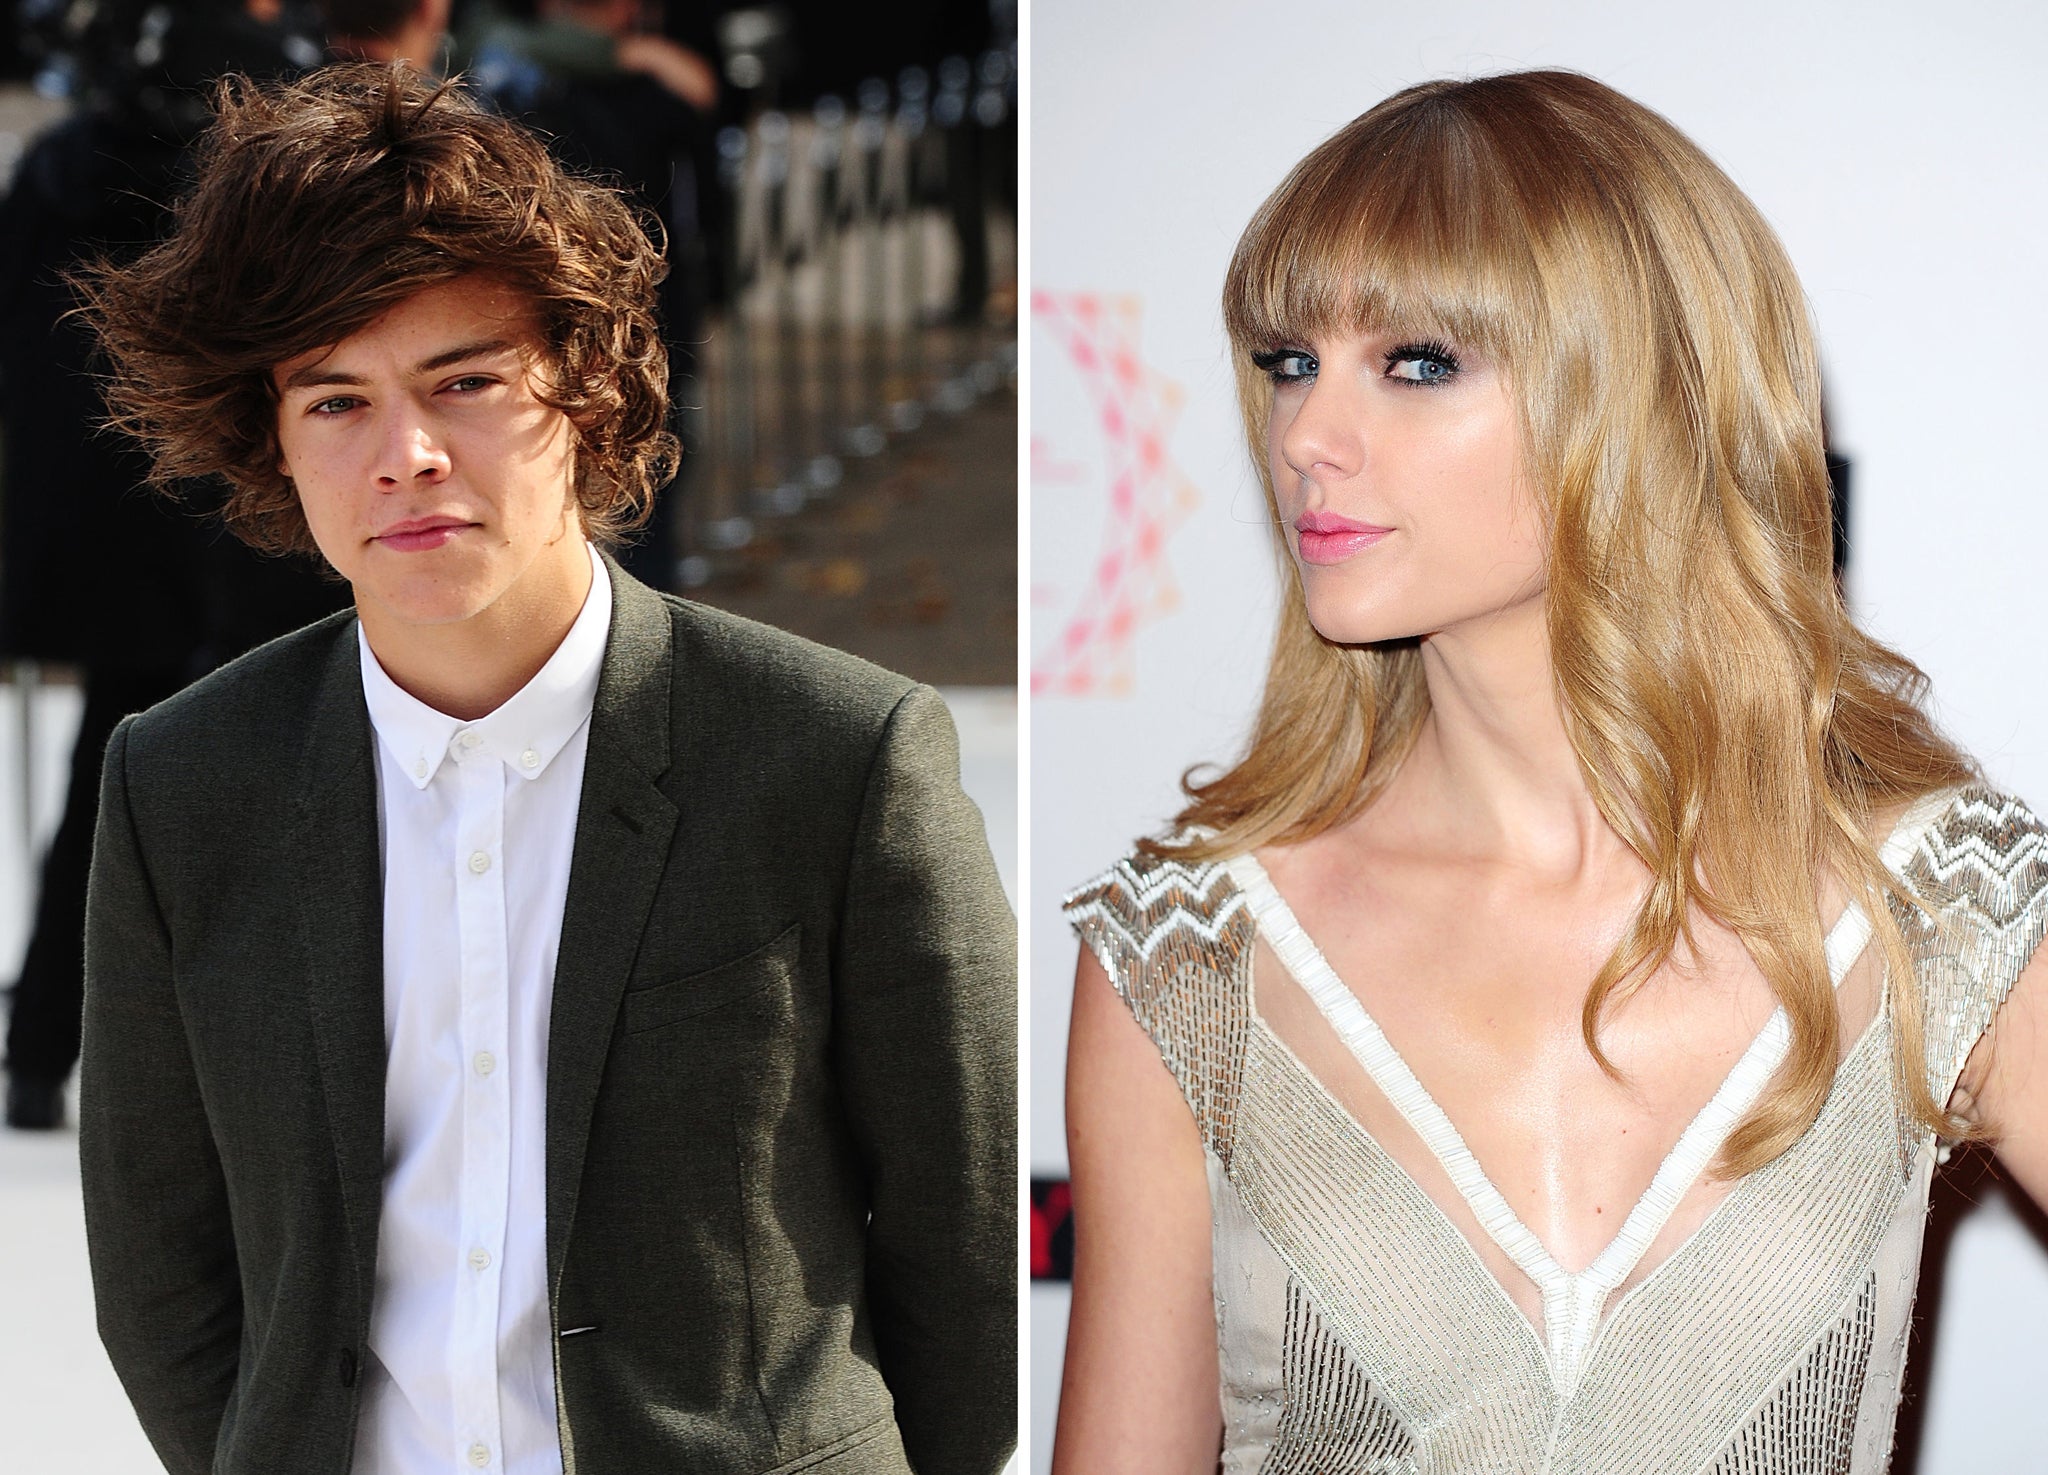 Harry Styles and Taylor Swift, who have split following a bust-up in the Caribbean, according to reports.